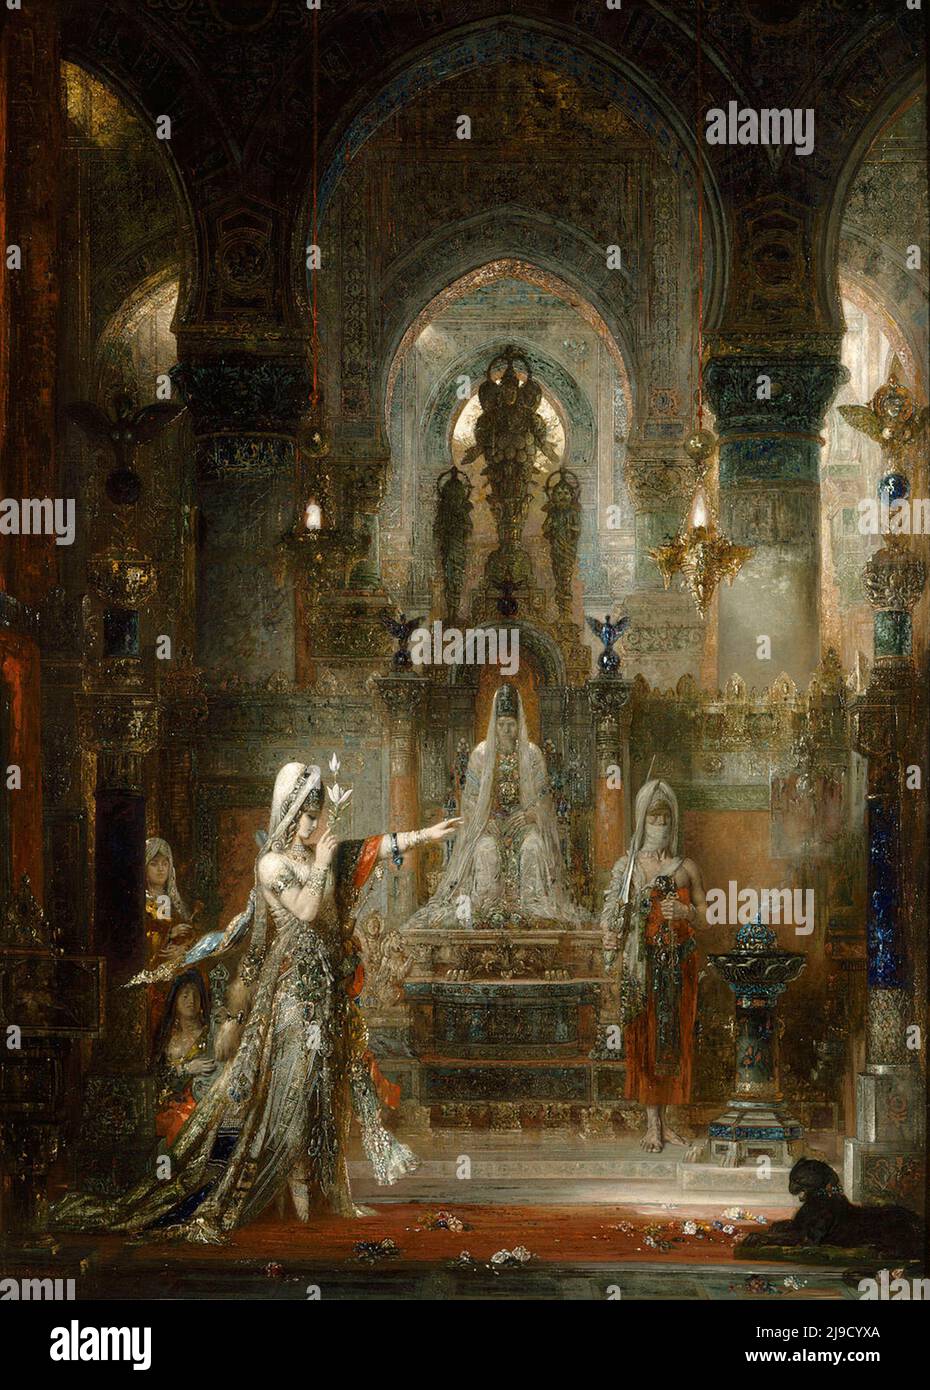 Salome and the Apparition of the Baptist's Head by Gustave Moreau. The scene shows Salome dancing seductively for Herod whilst the apparition of the recently executed John the Baptist appears in the air. Stock Photo